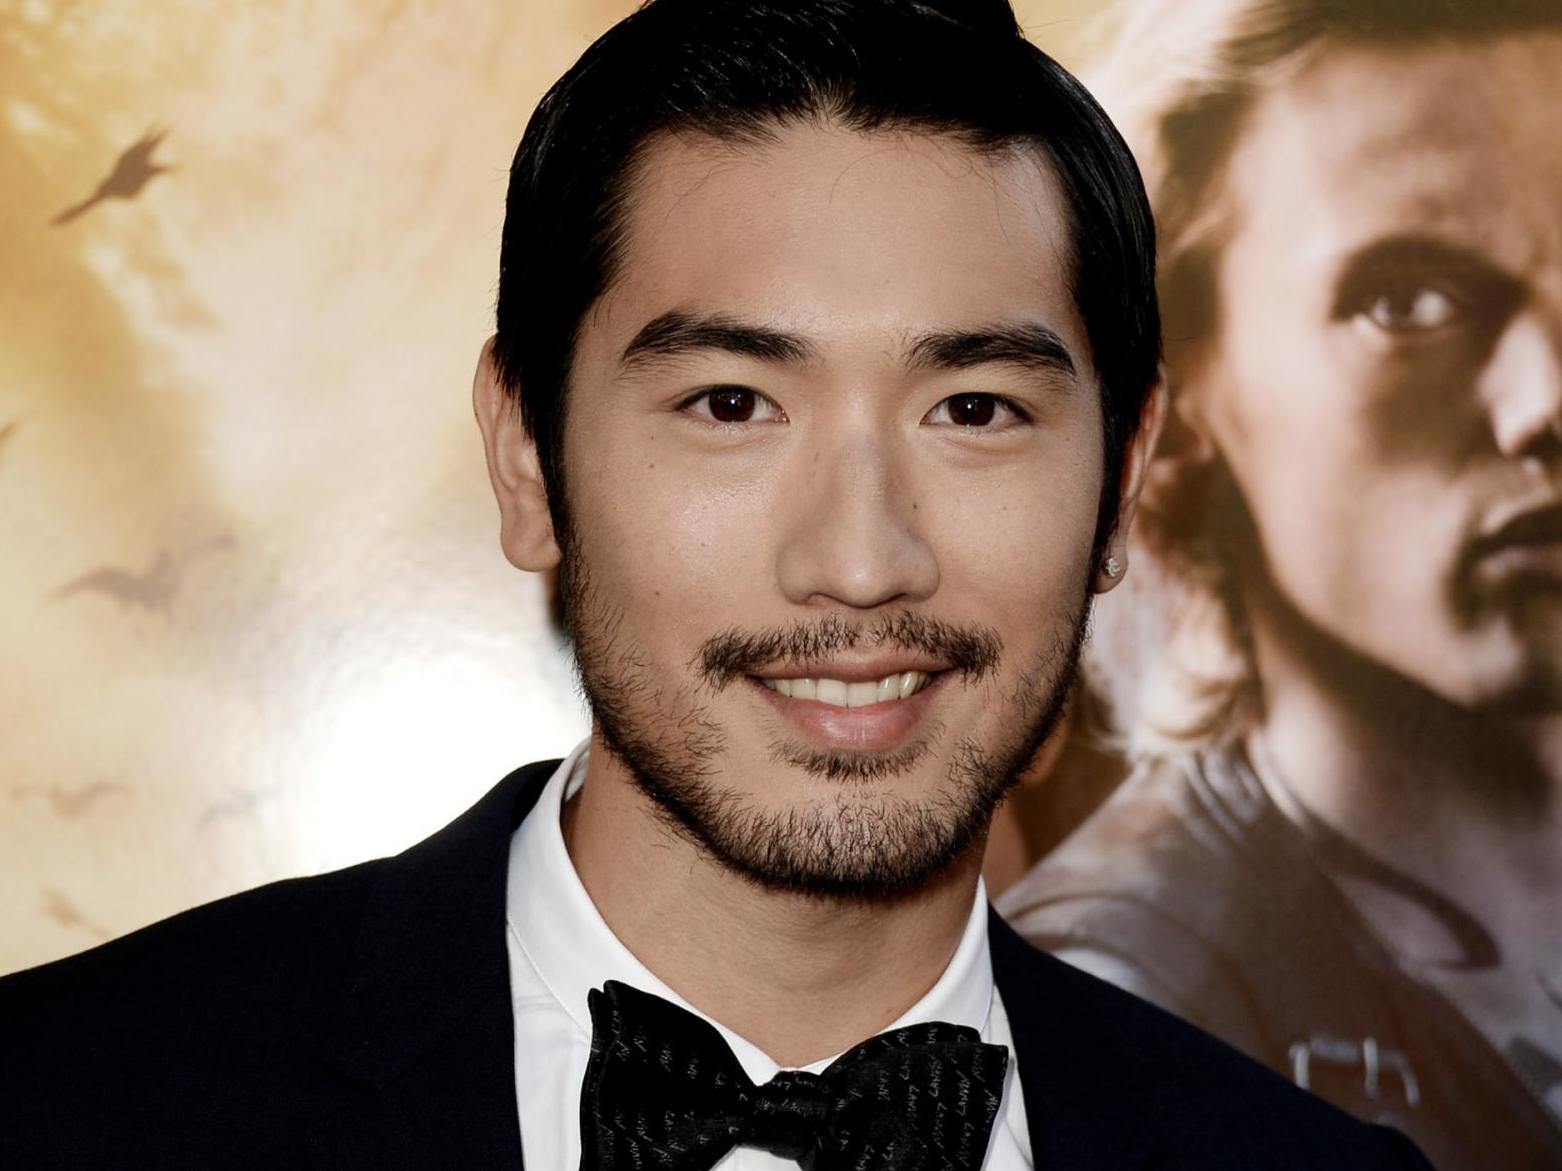 Godfrey Gao Death Model And Toy Story Actor Dies After Collapsing On Set Aged 35 The Independent The Independent